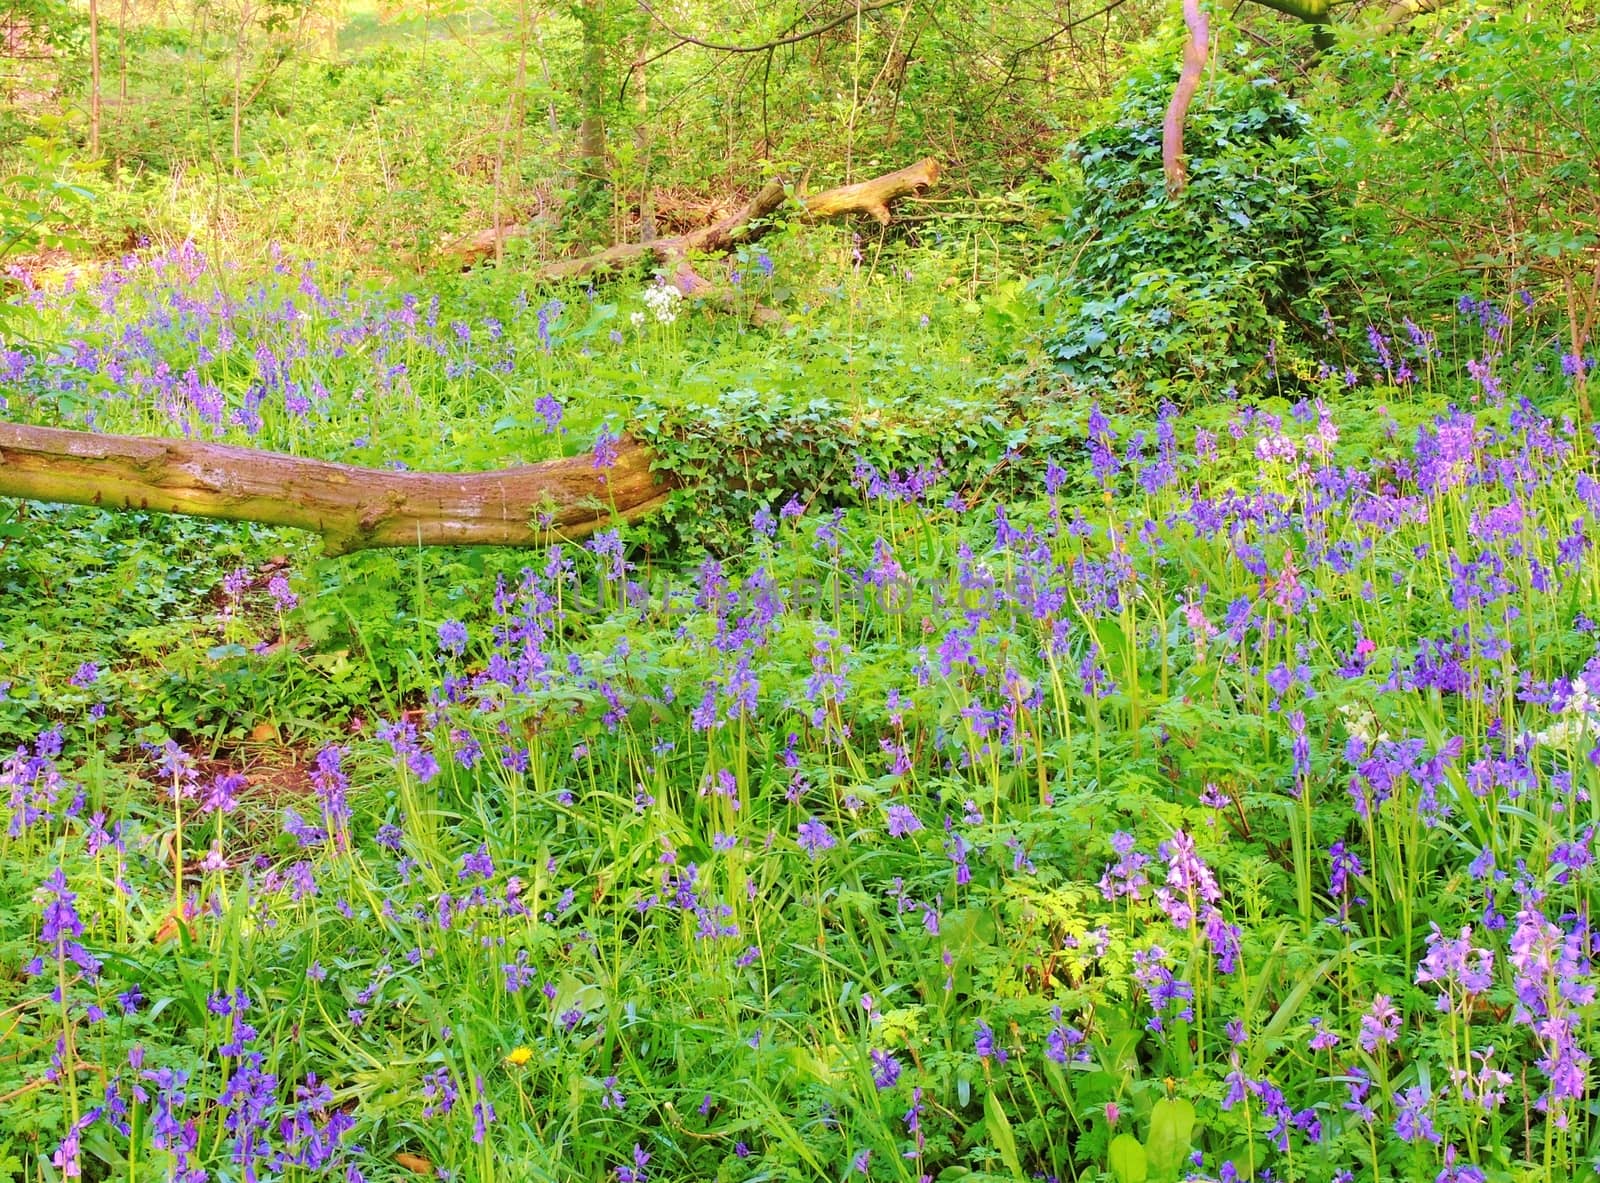 Bluebells photographed in a peaceful woodland scene.